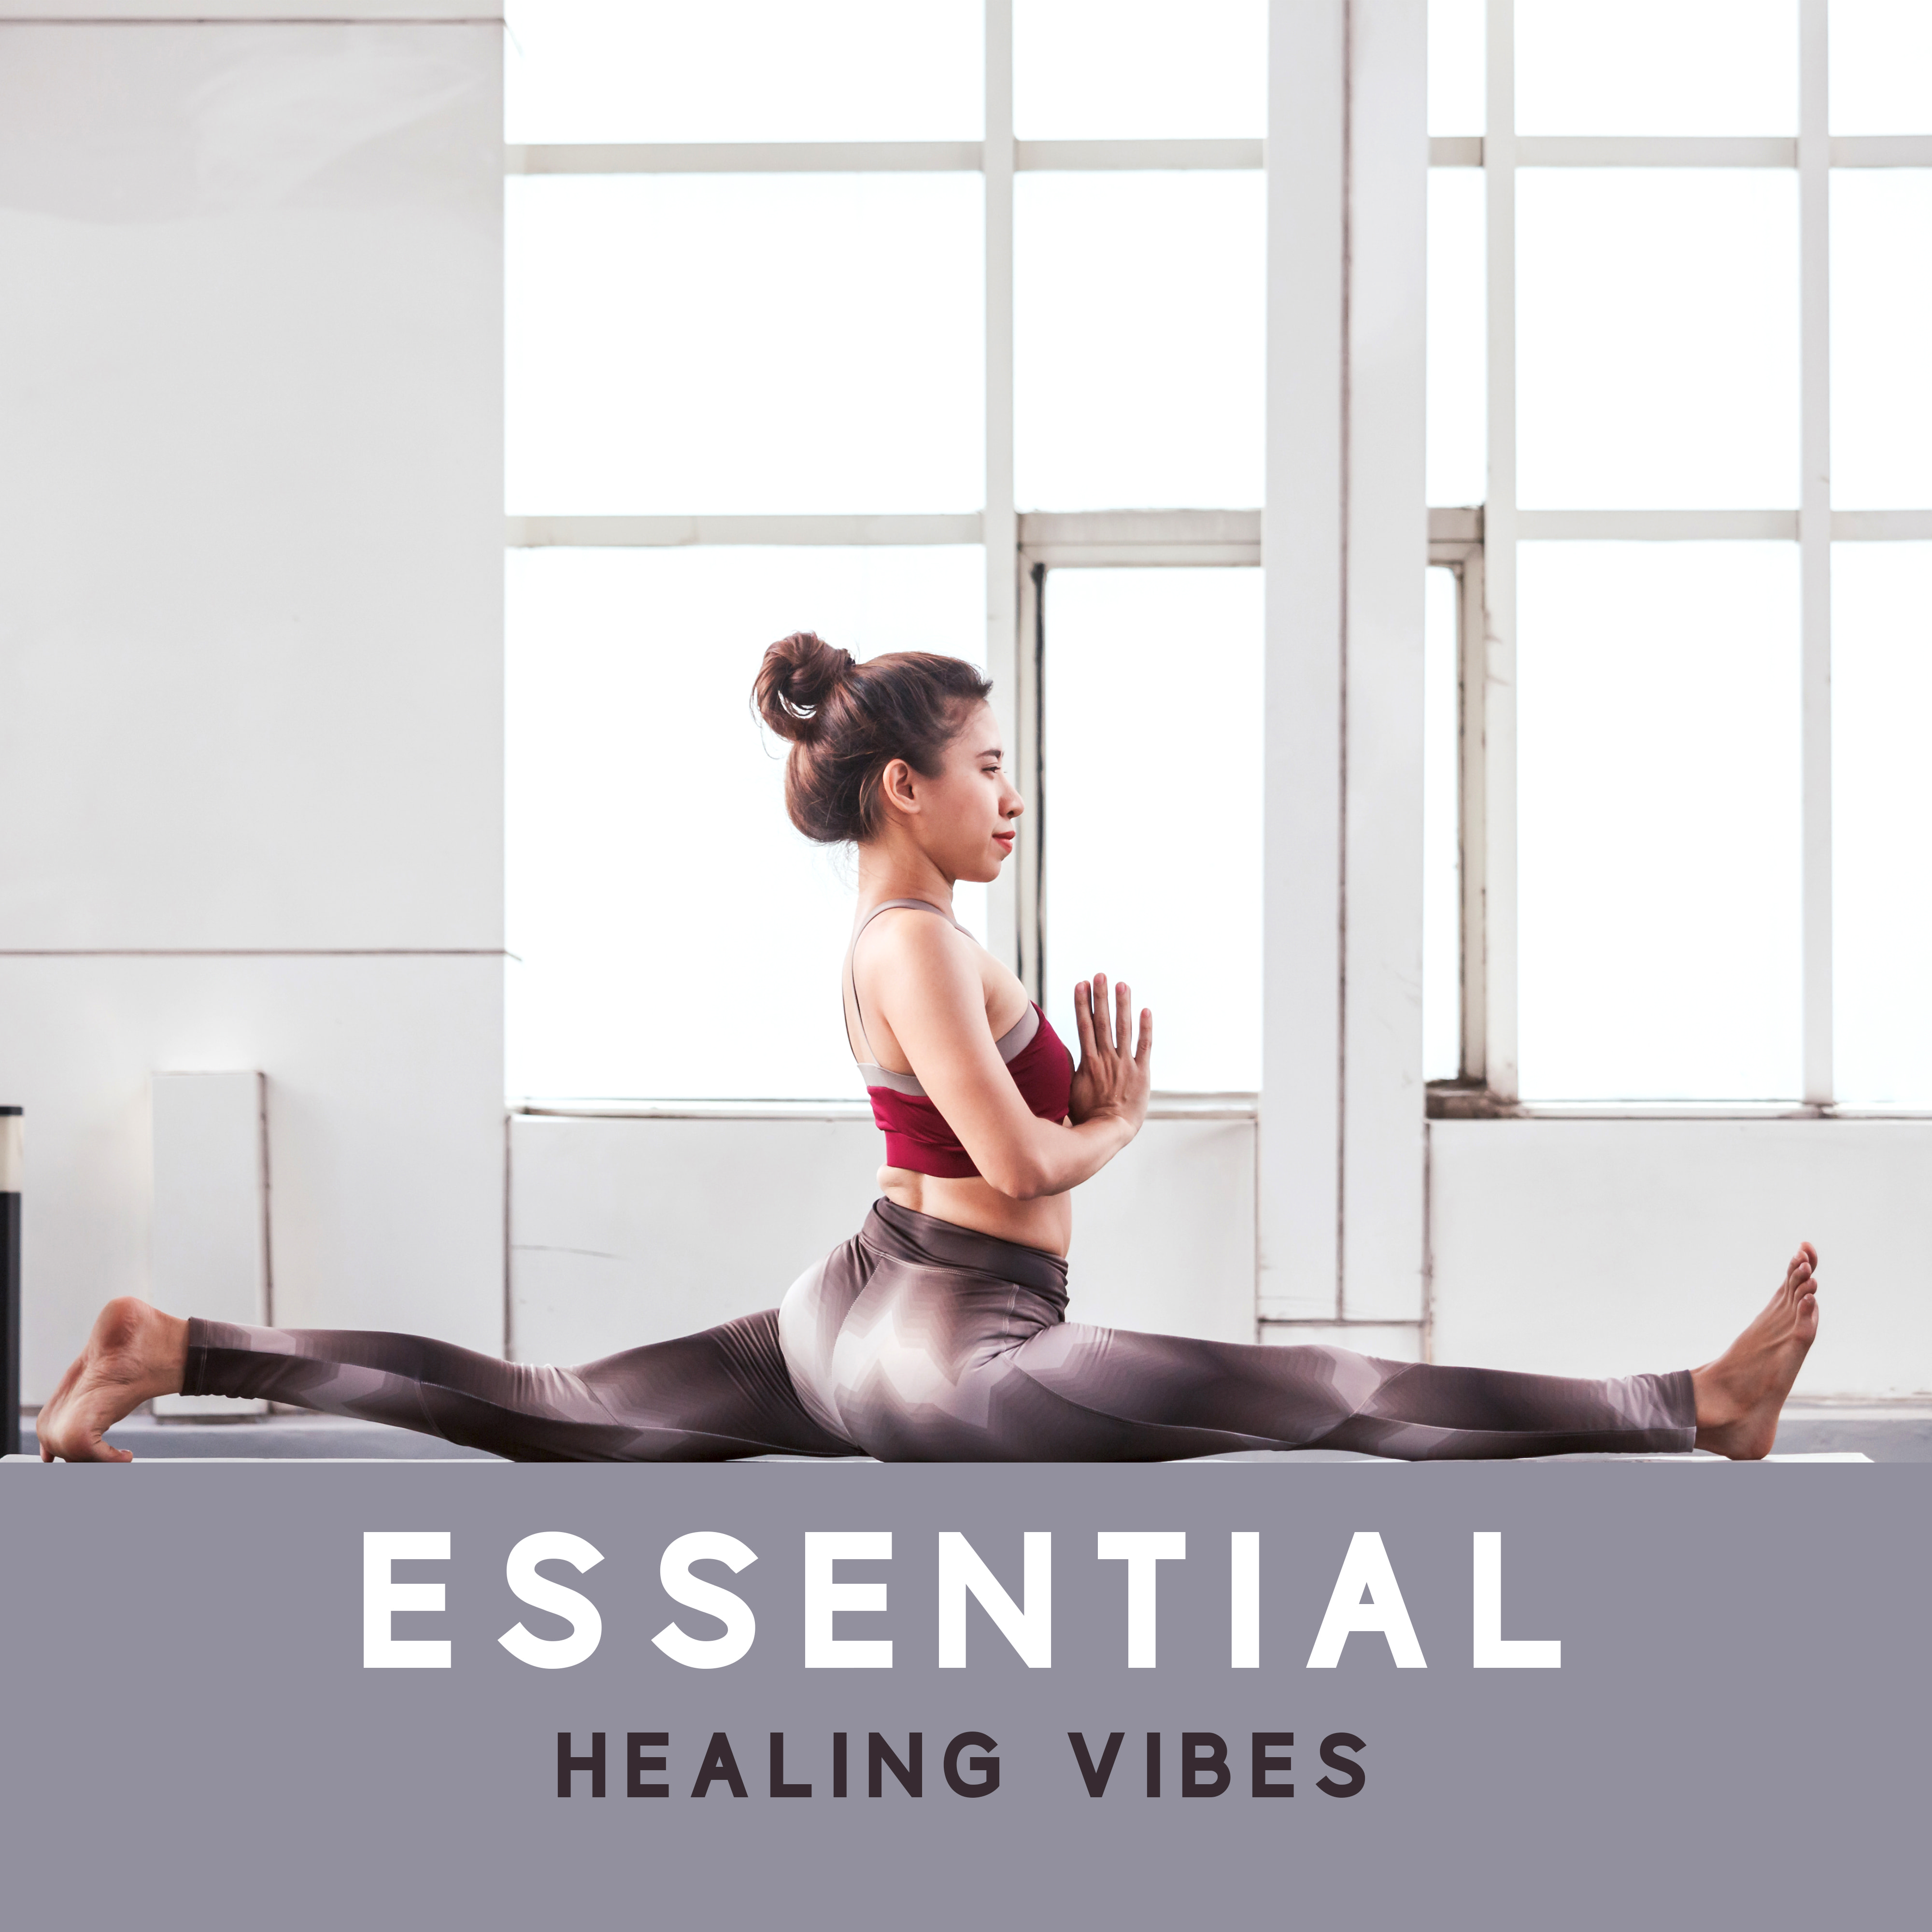 Essential Healing Vibes